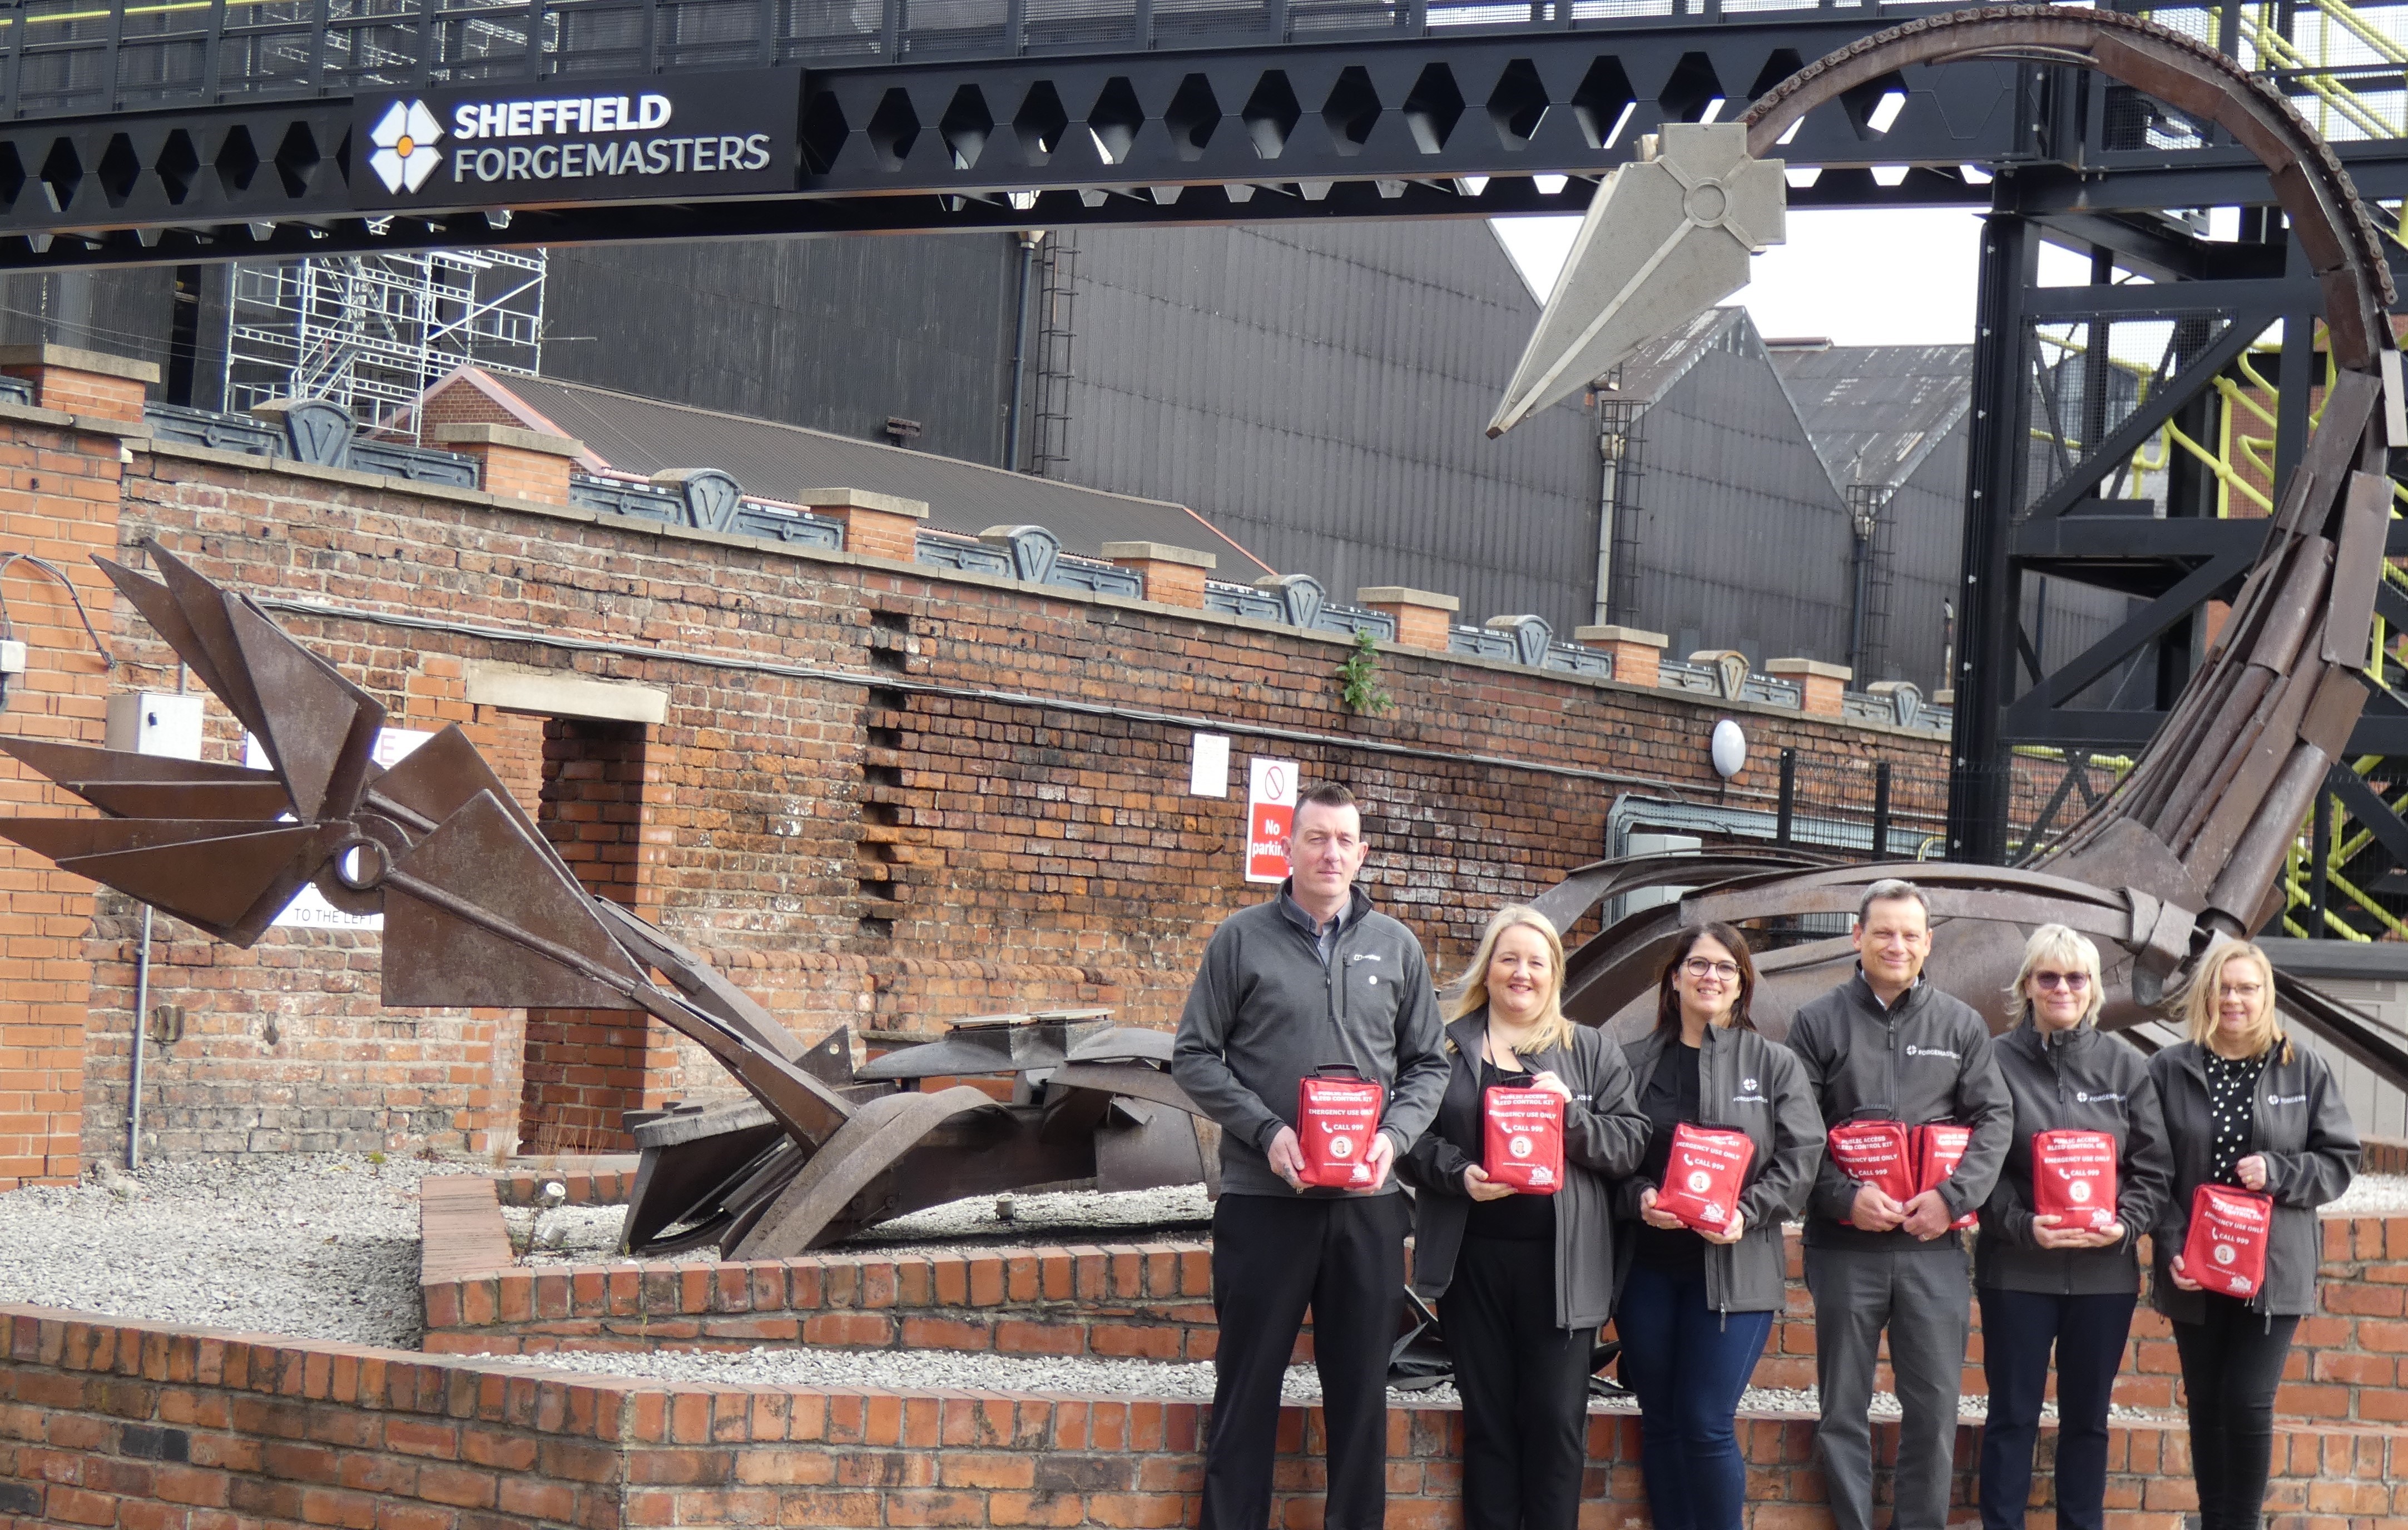 UK Company first as Sheffield Forgemasters deploy workplace bleed kits preview image